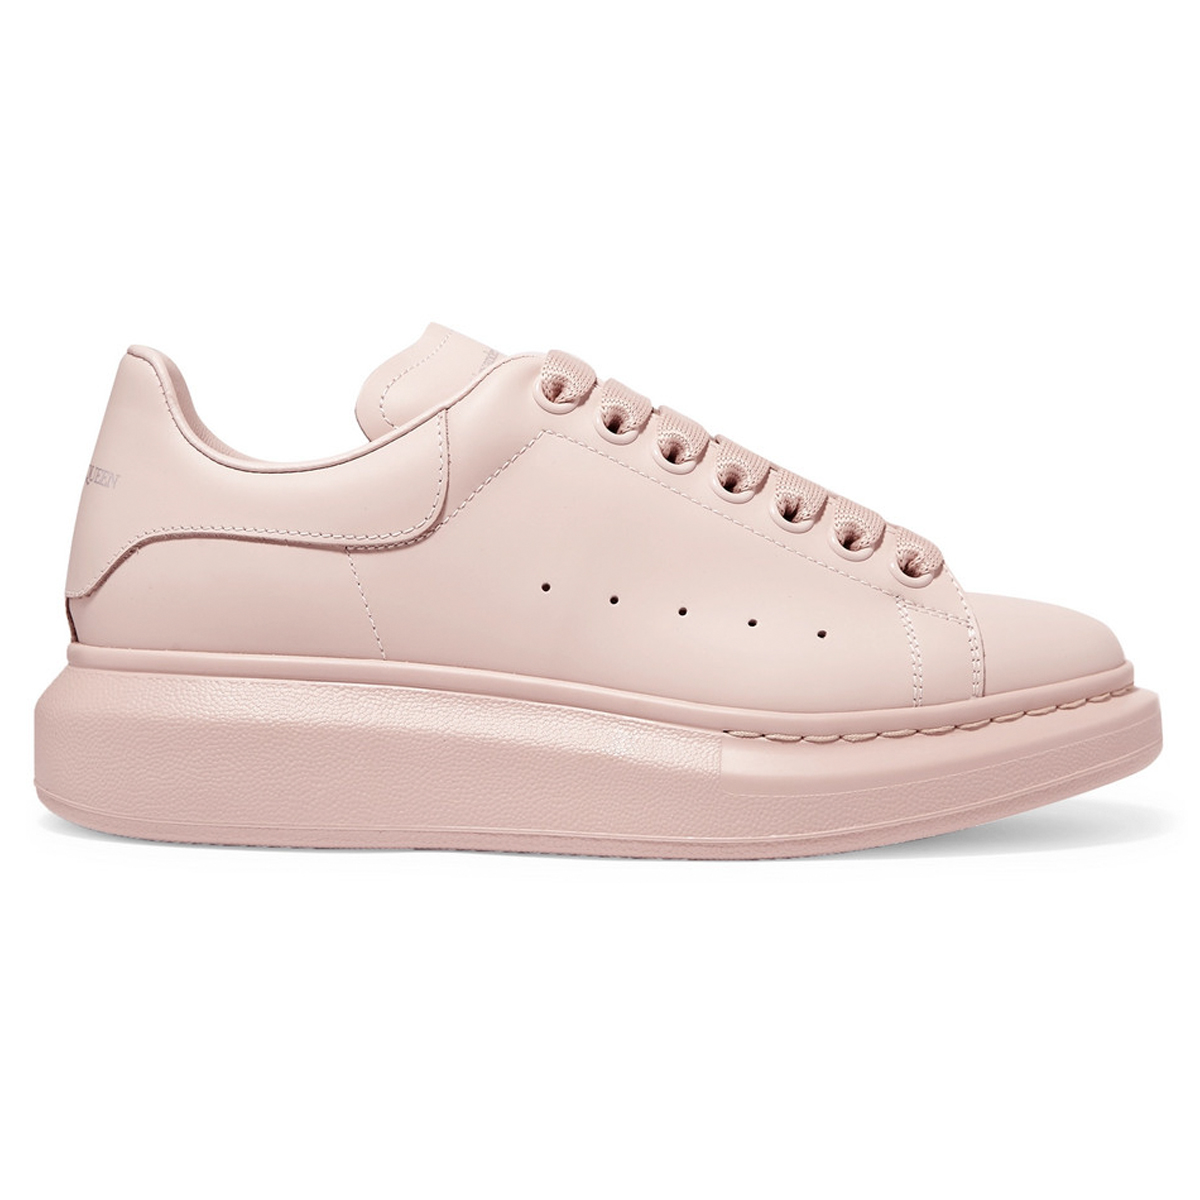 most popular women's shoes 2019